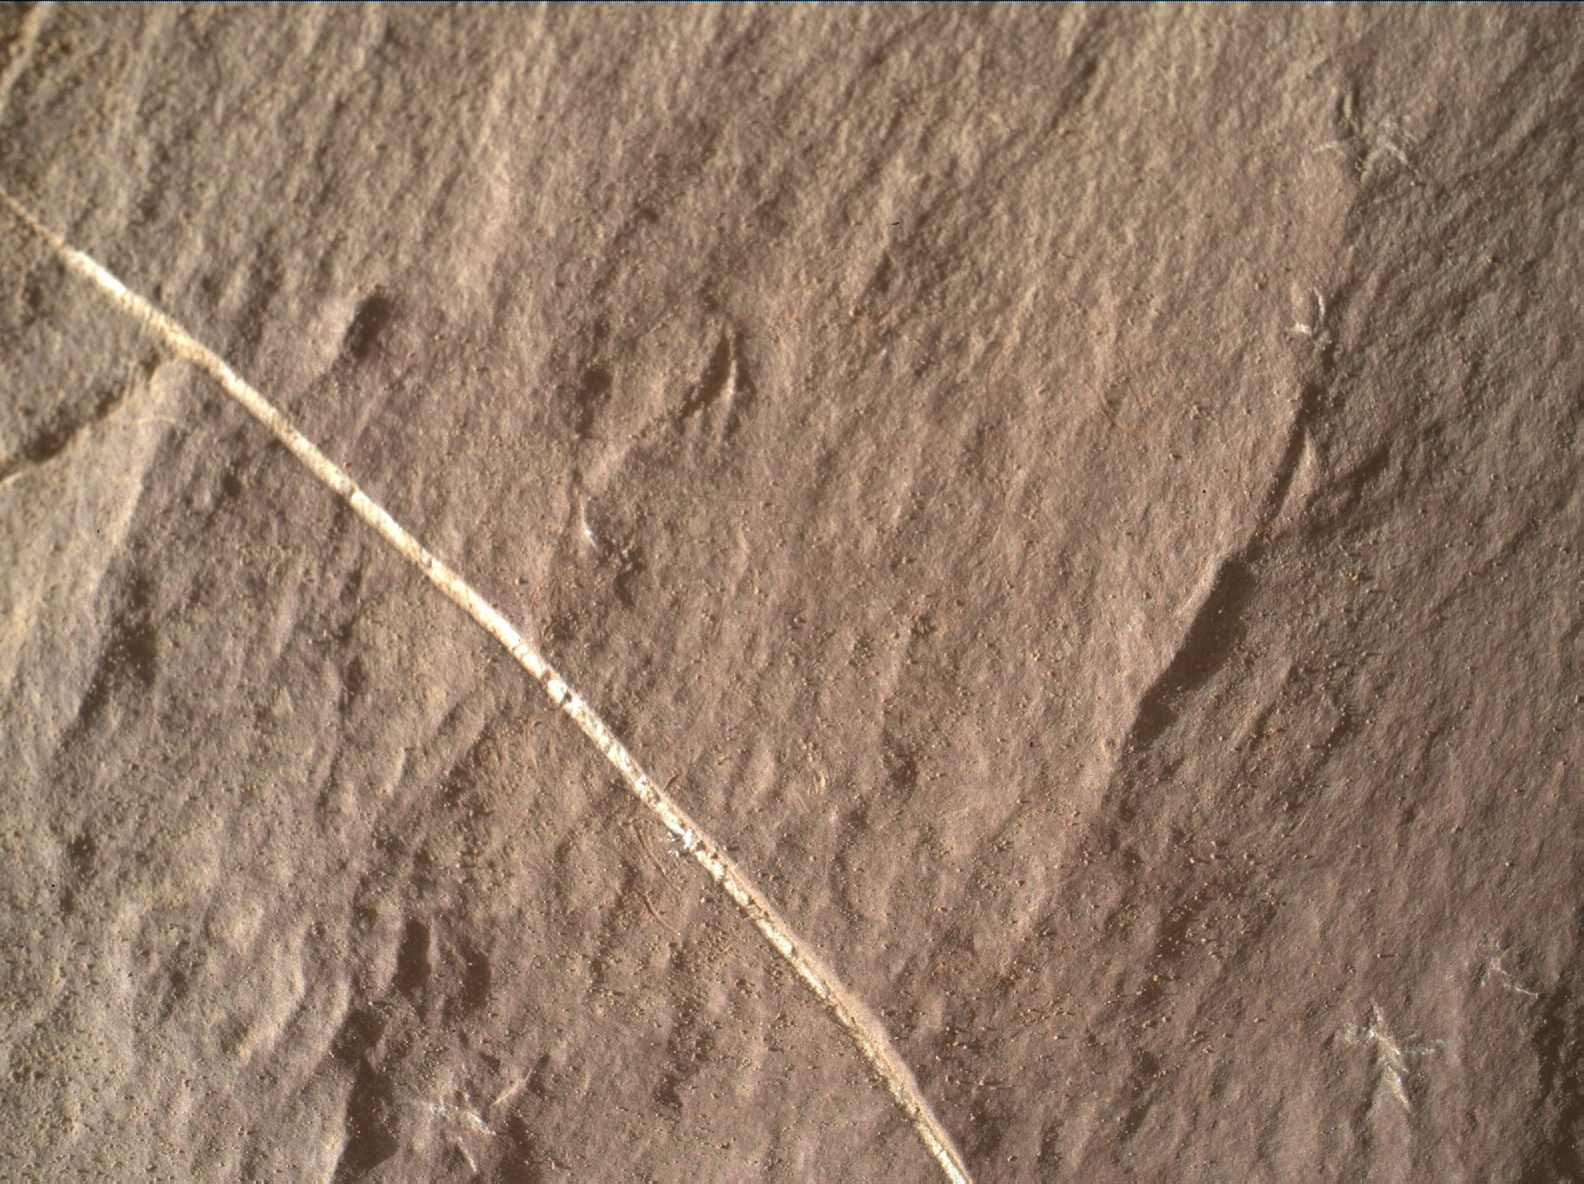 Nasa's Mars rover Curiosity acquired this image using its Mars Hand Lens Imager (MAHLI) on Sol 1863